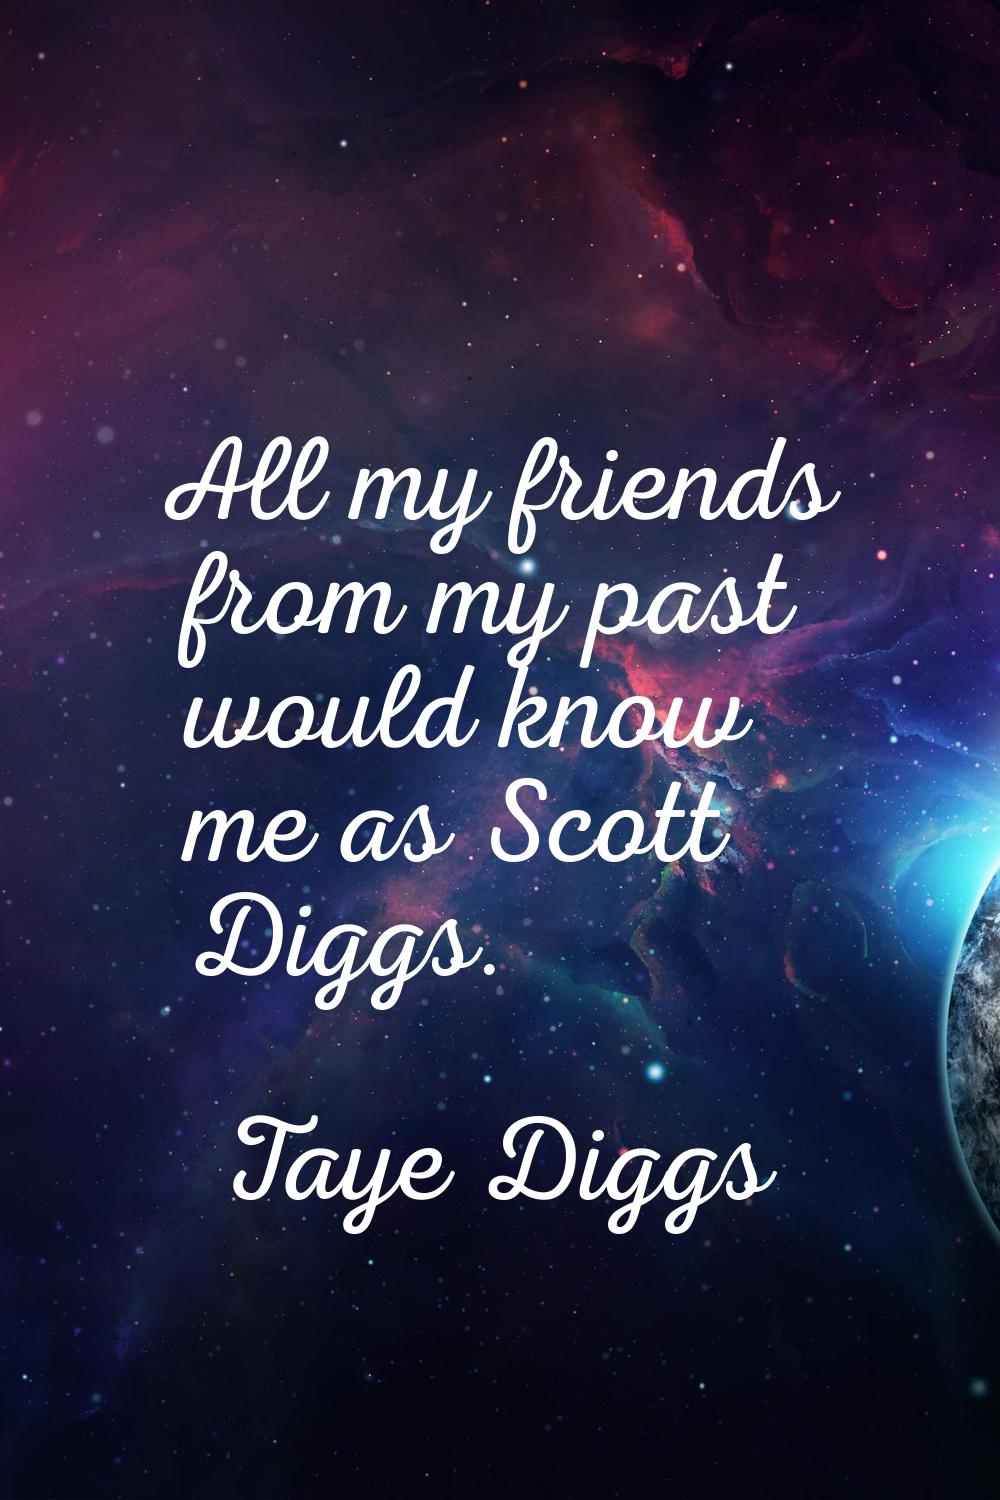 All my friends from my past would know me as Scott Diggs.